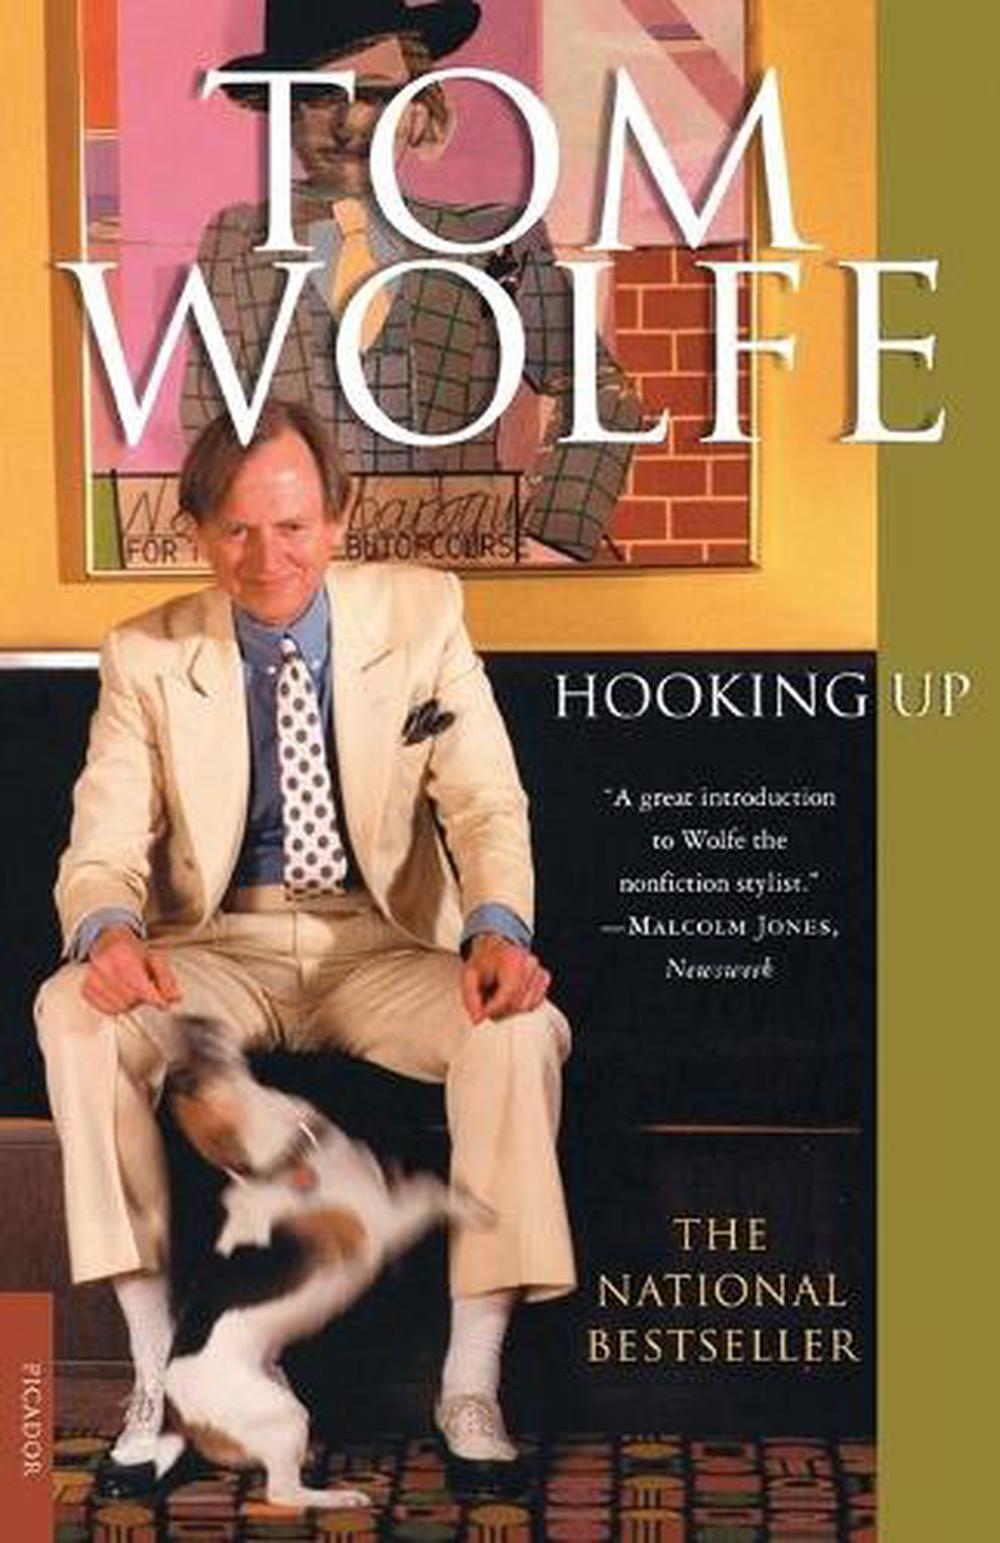 Hooking Up By Tom Wolfe English Paperback Book Free Shipping 